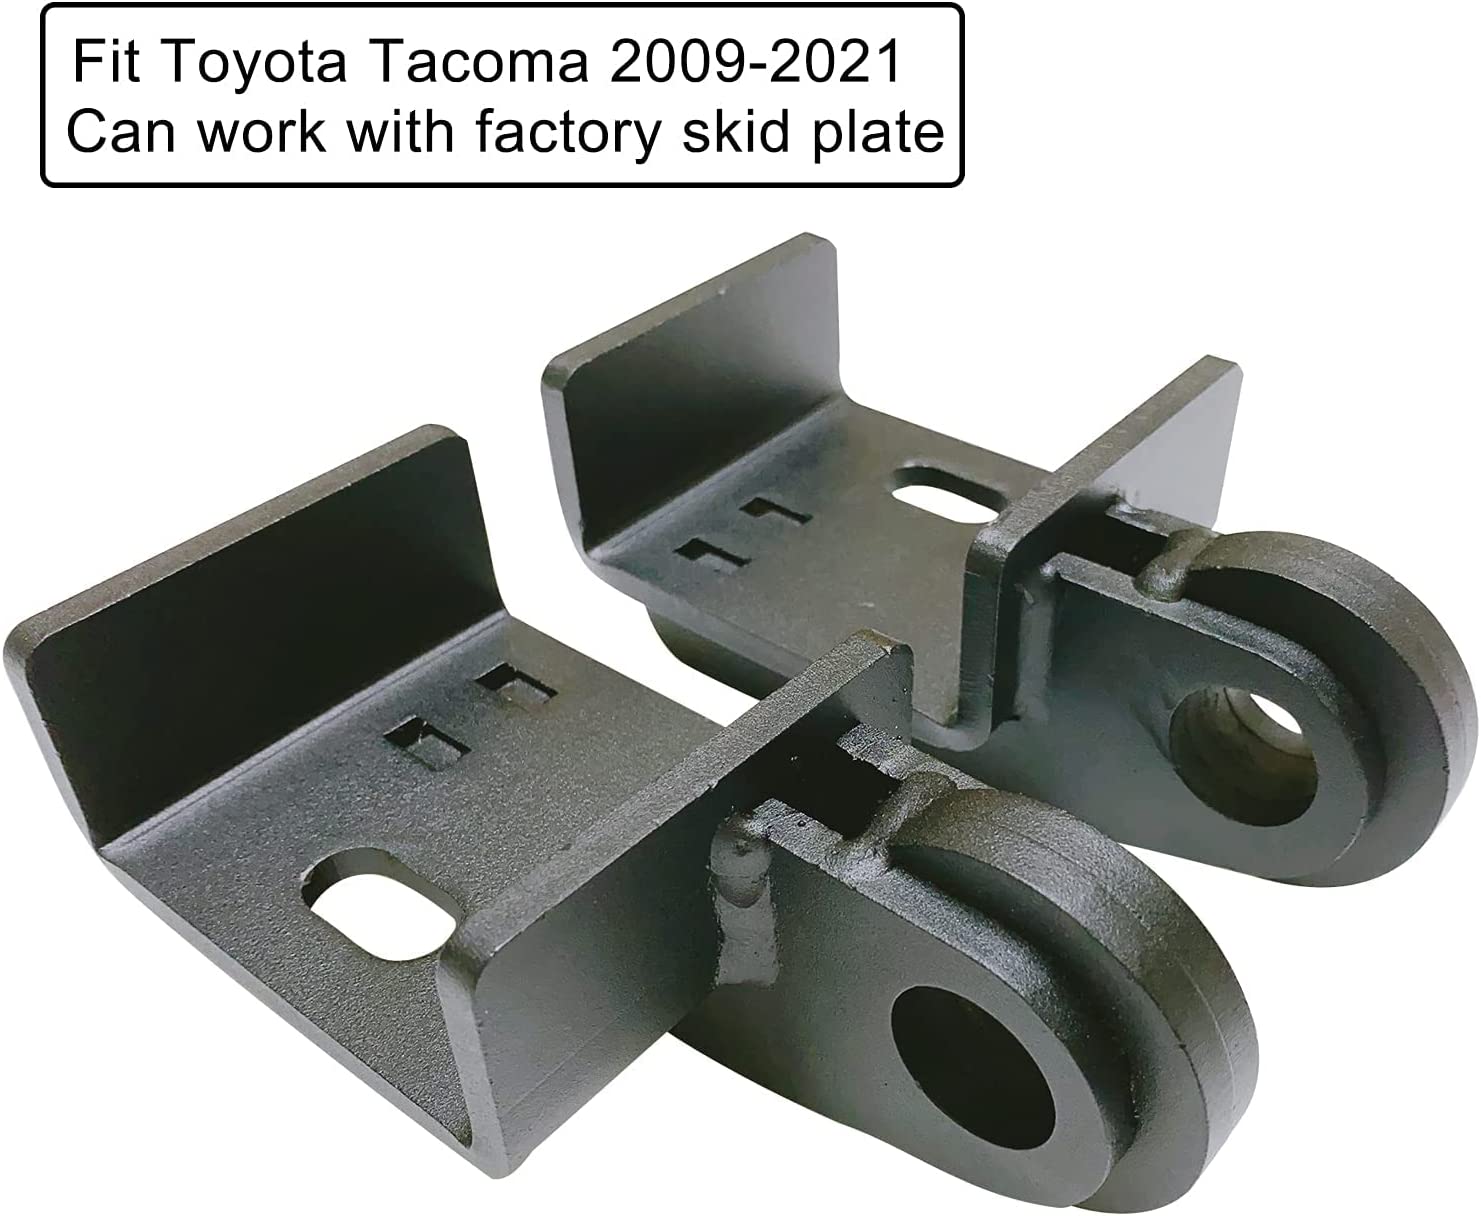 2009-Later Toyota Tacoma Front Demon Tow Hook Bracket with 3/4